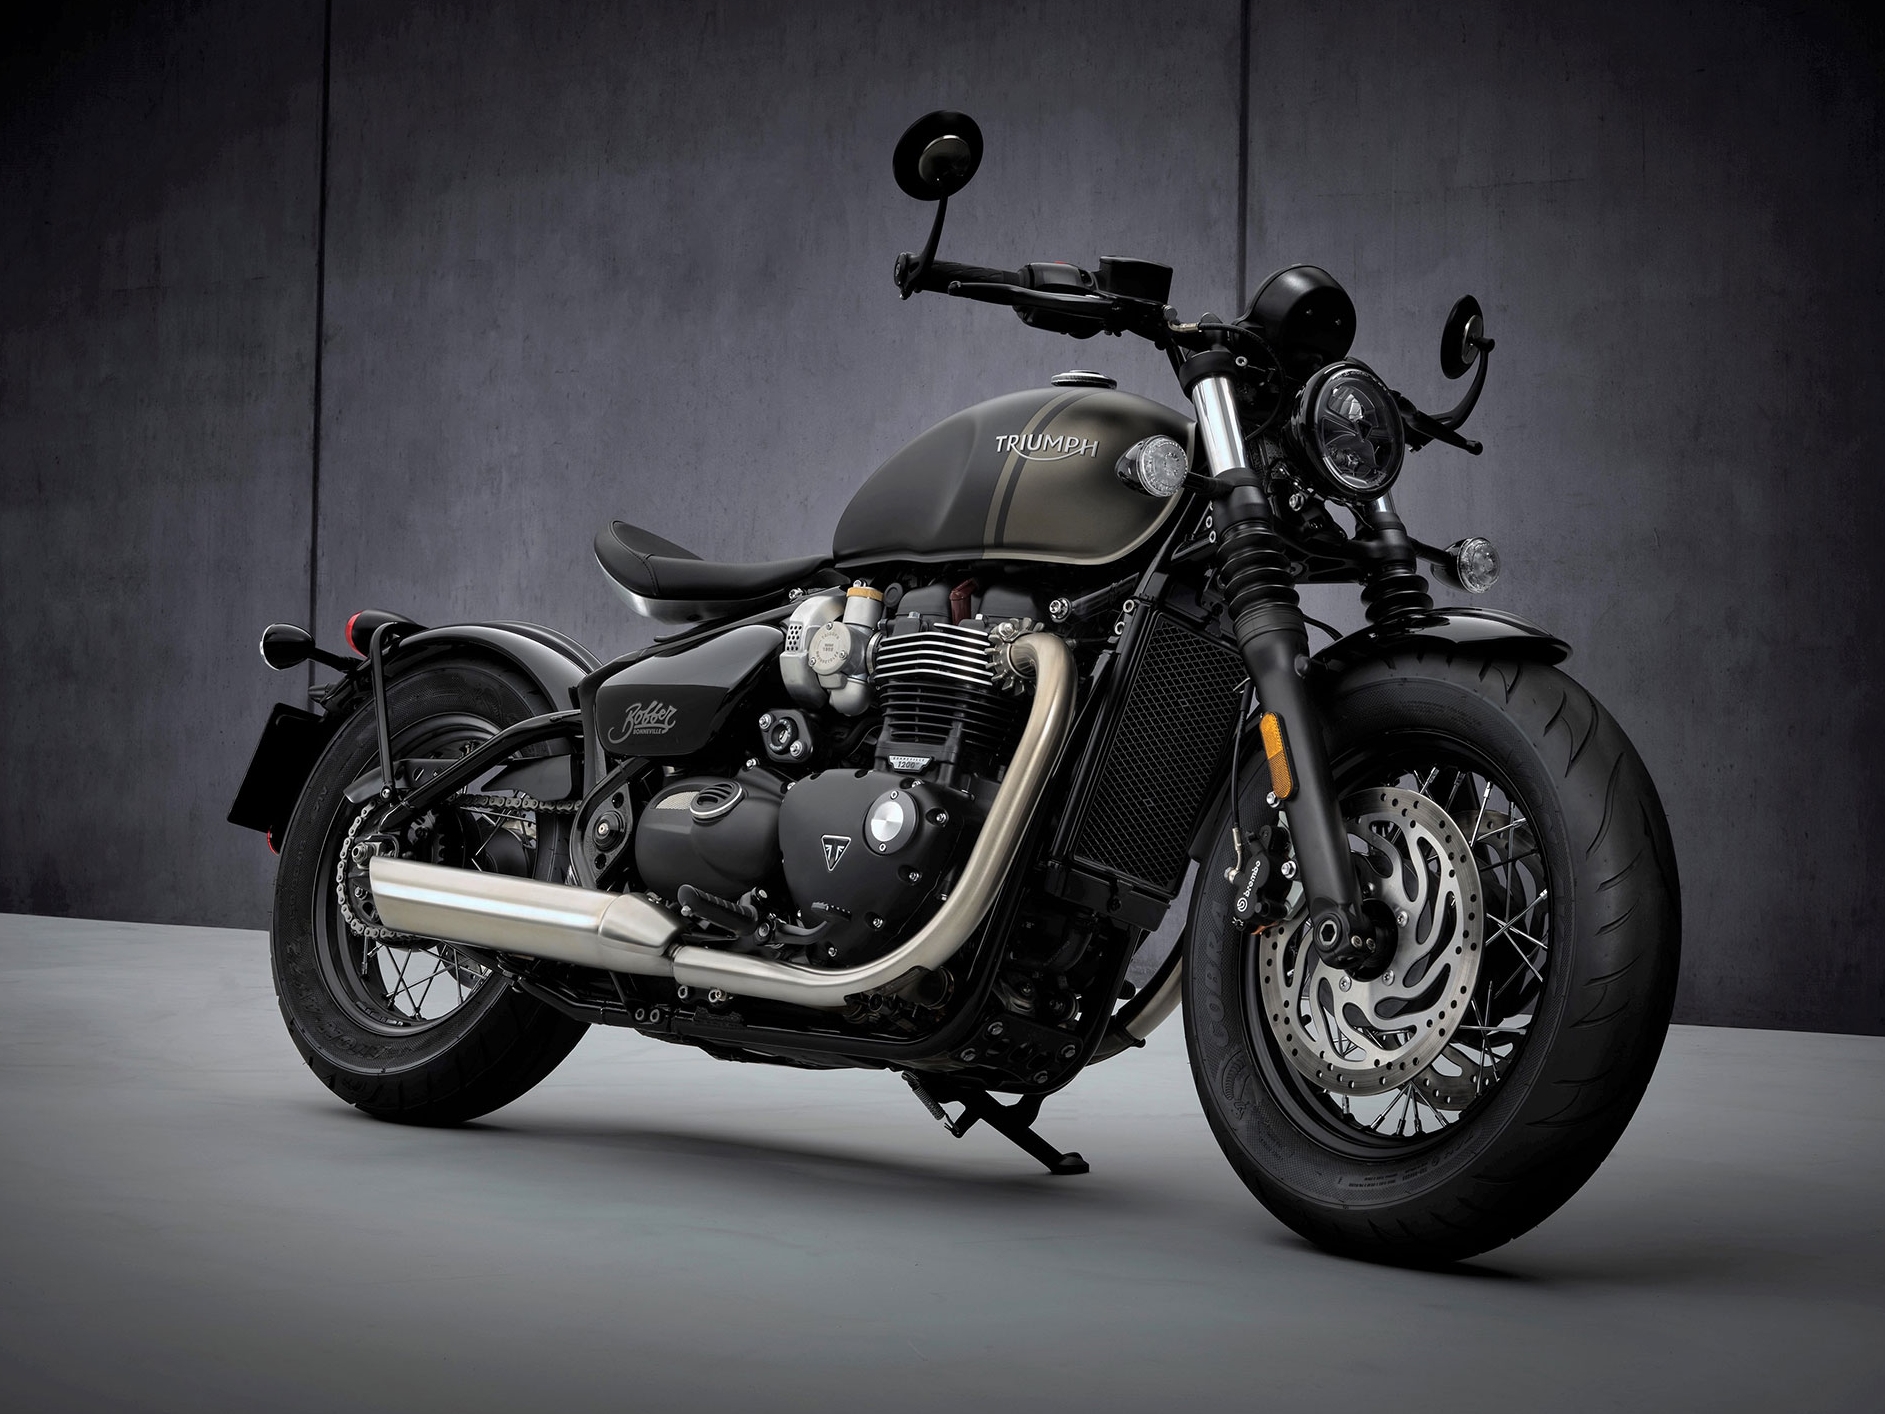 What are bobber motorcycles good for?